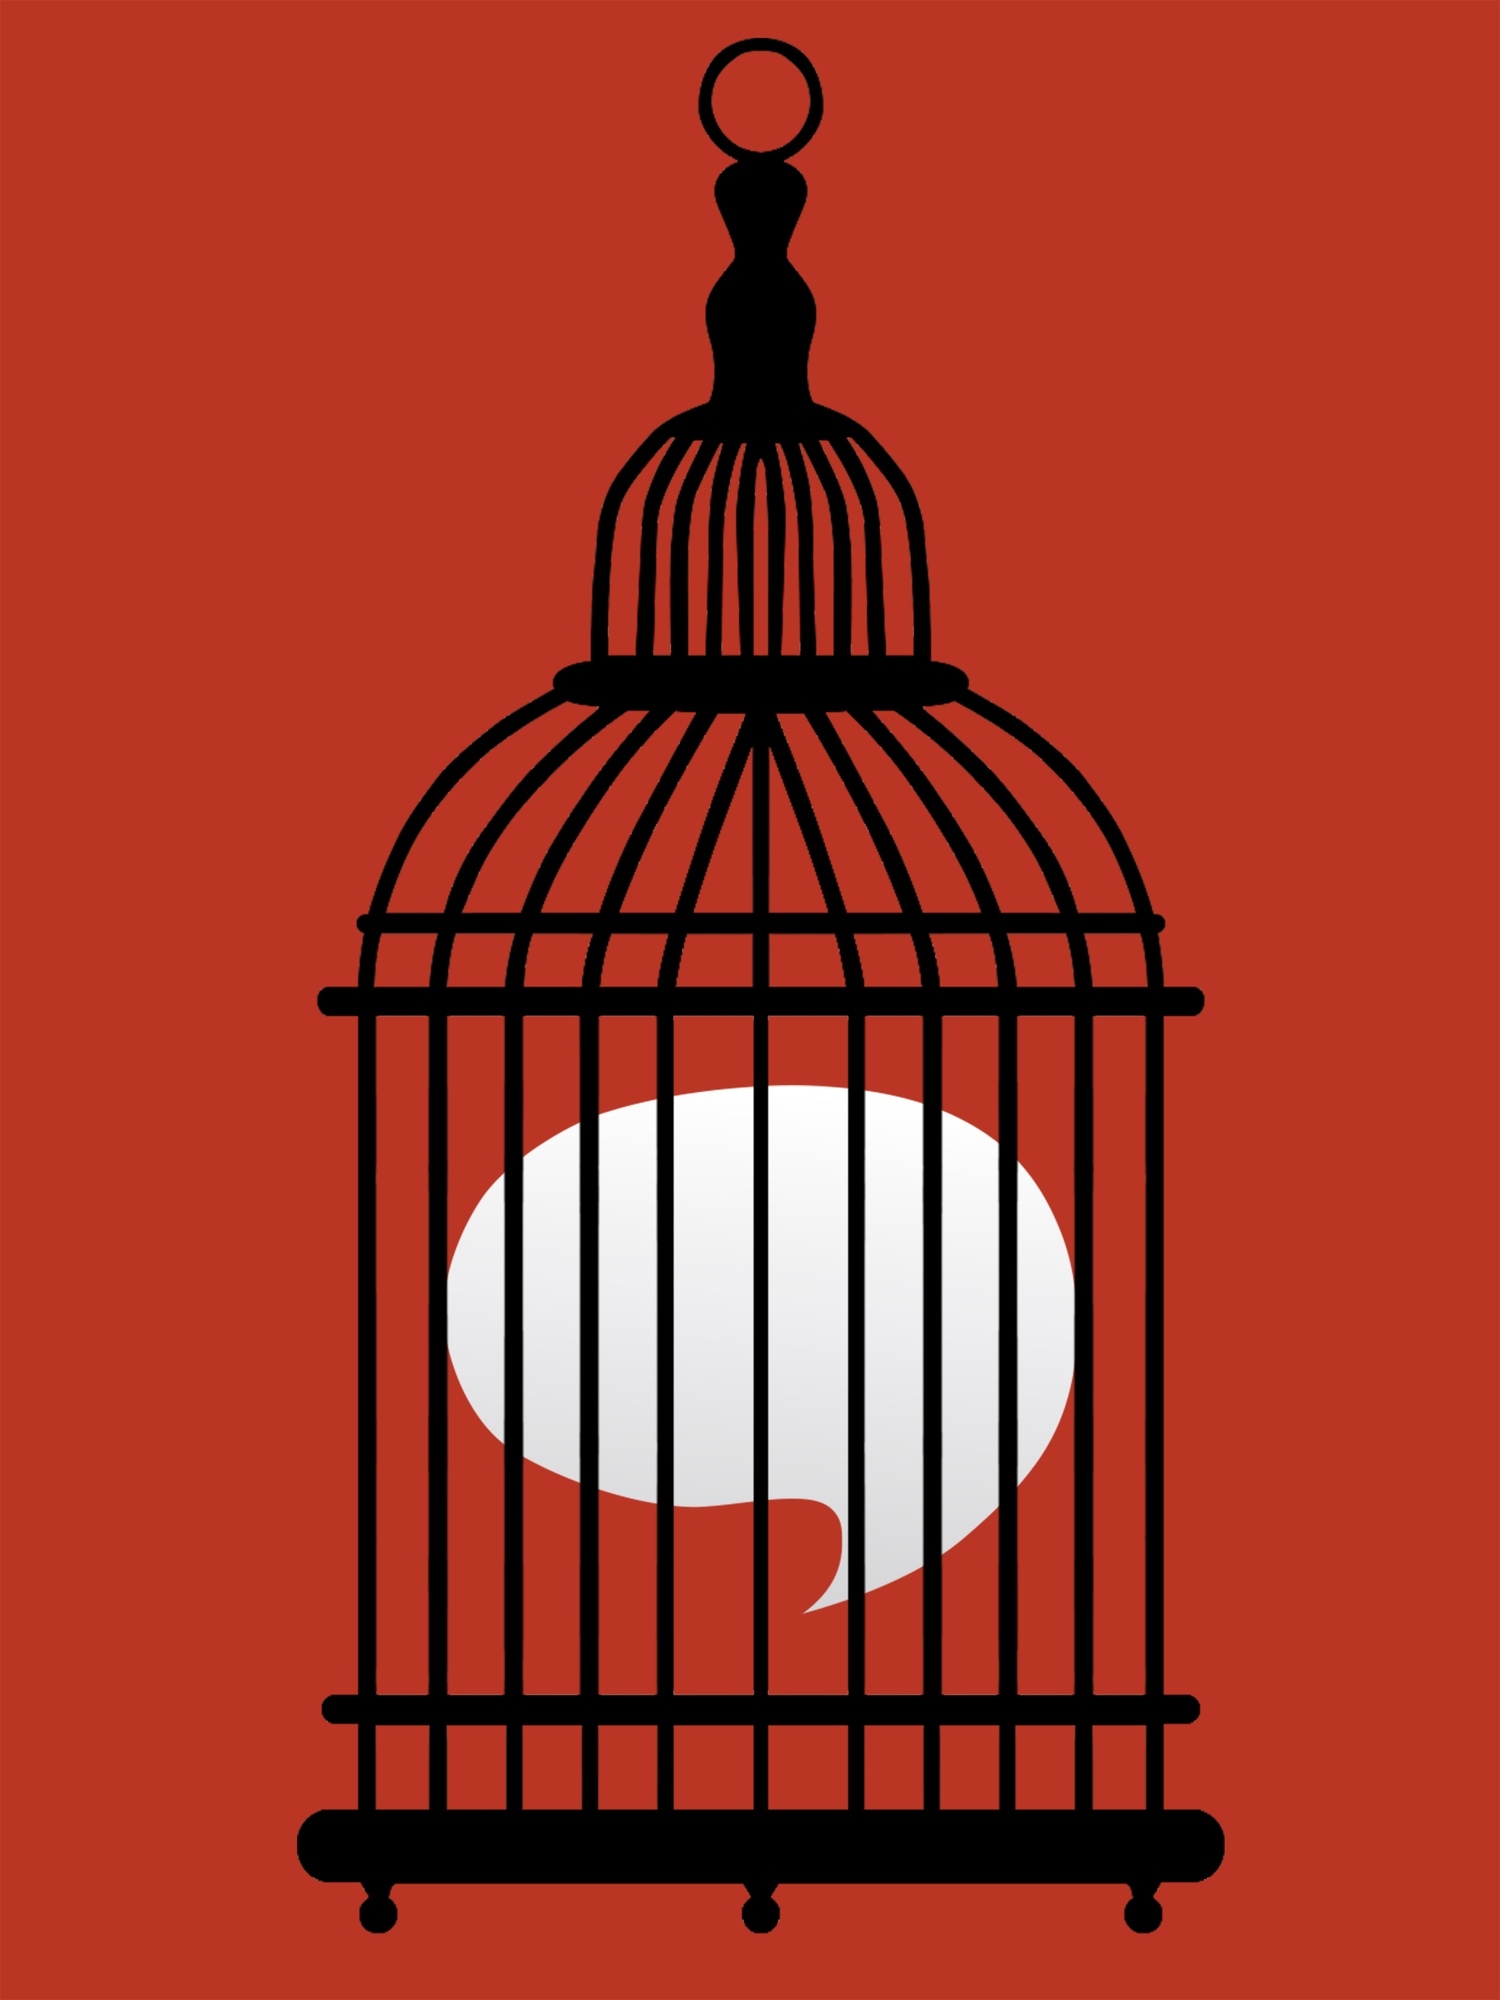 dictatorship-concept-with-cage.jpg